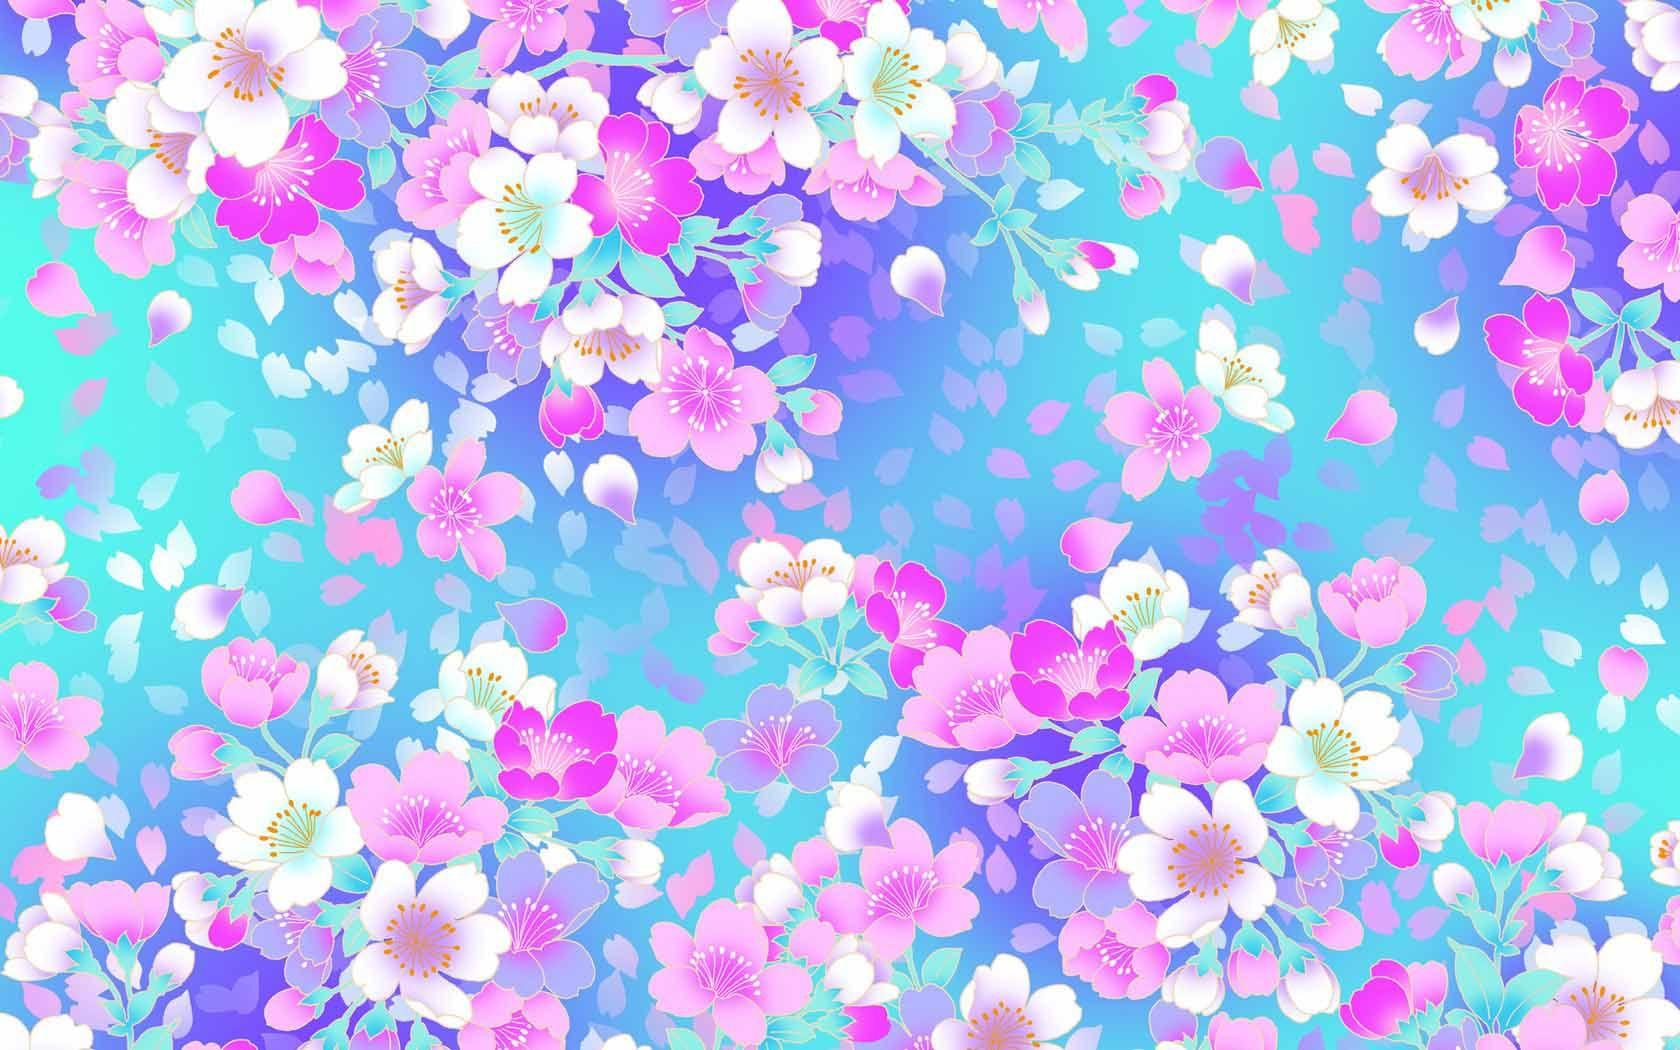 Colorful Floral Wallpaper For iPhone DM. Awesomeness. Wallpaper